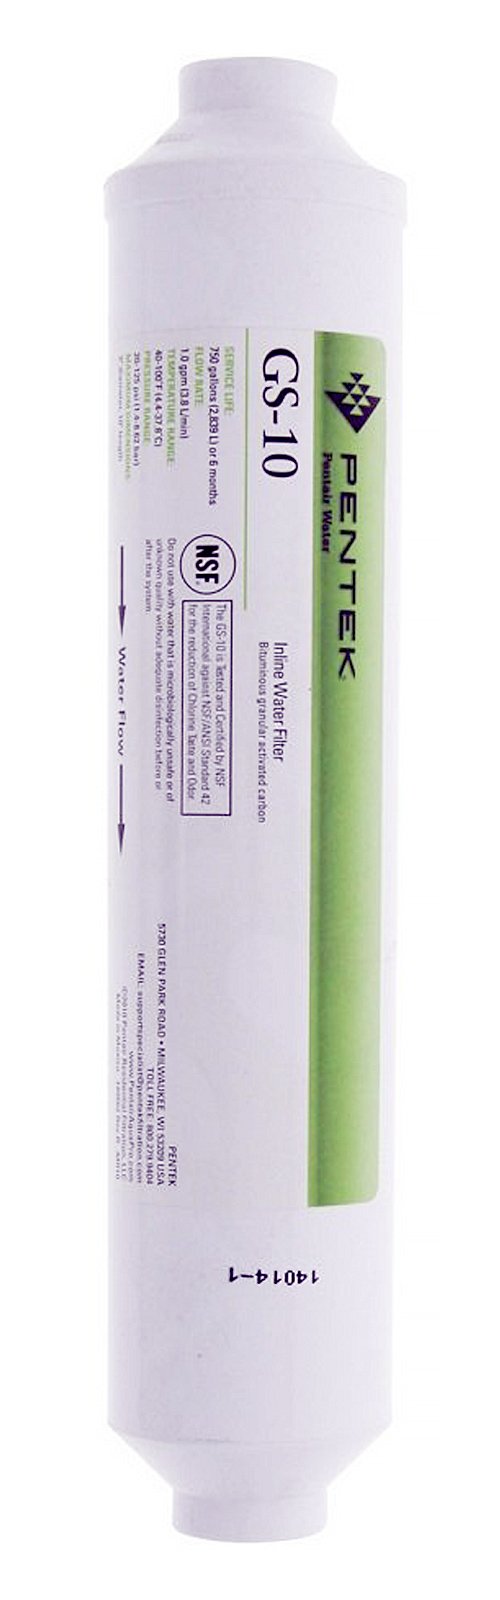 Pentek GS-10 In Line Water Filter with Quick Connect Compression Fittings